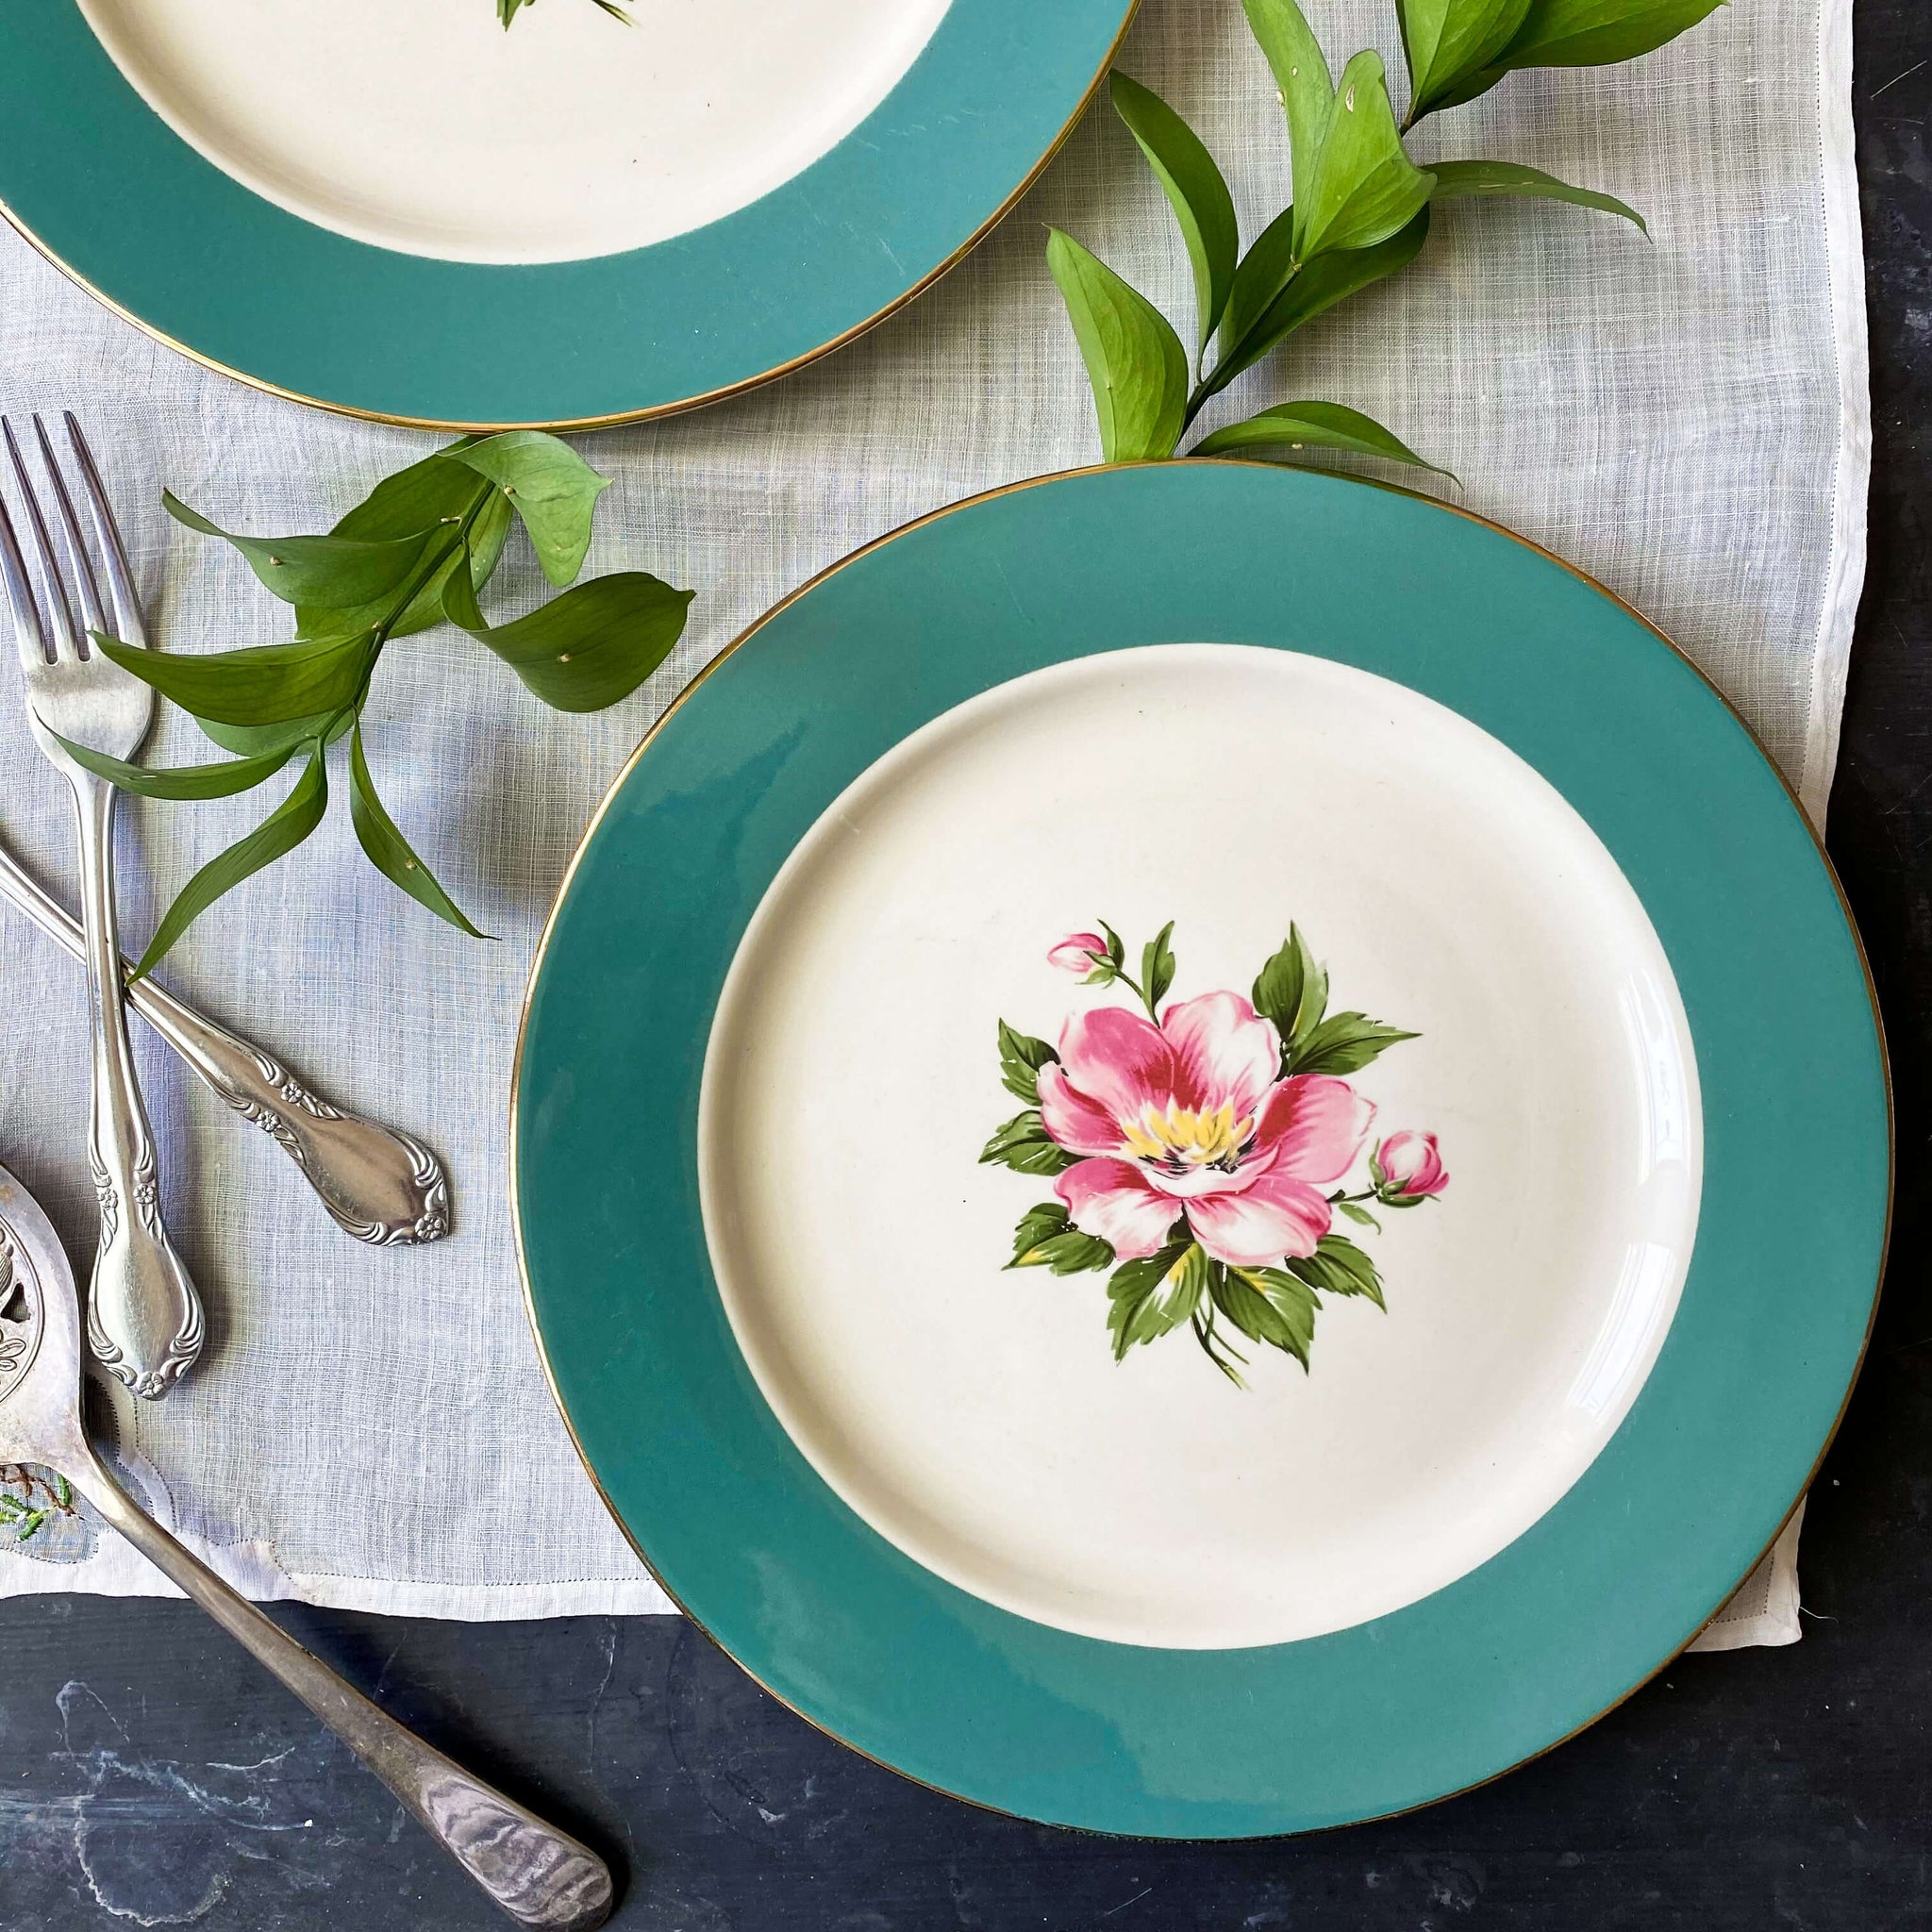 Vintage 1950s Pink Rose Dinner Plates - Empire Green Pattern Homer Laughlin - Set of Two